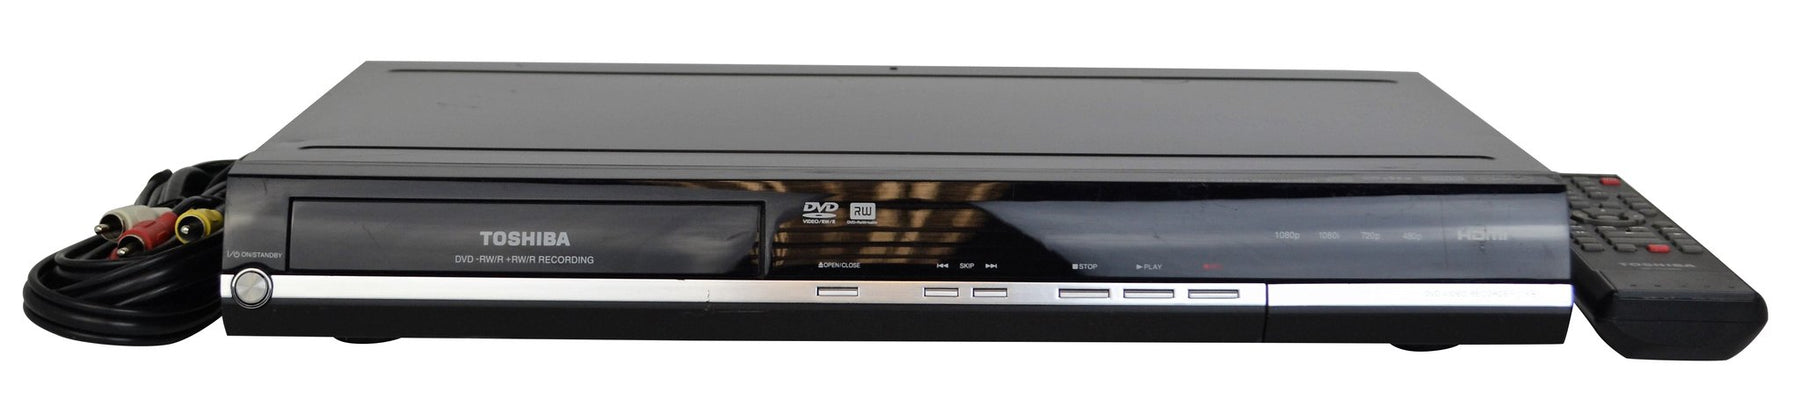 10 Important DVD Recorder Features - A Buyer Guide for Getting the Correct DVD Recorder